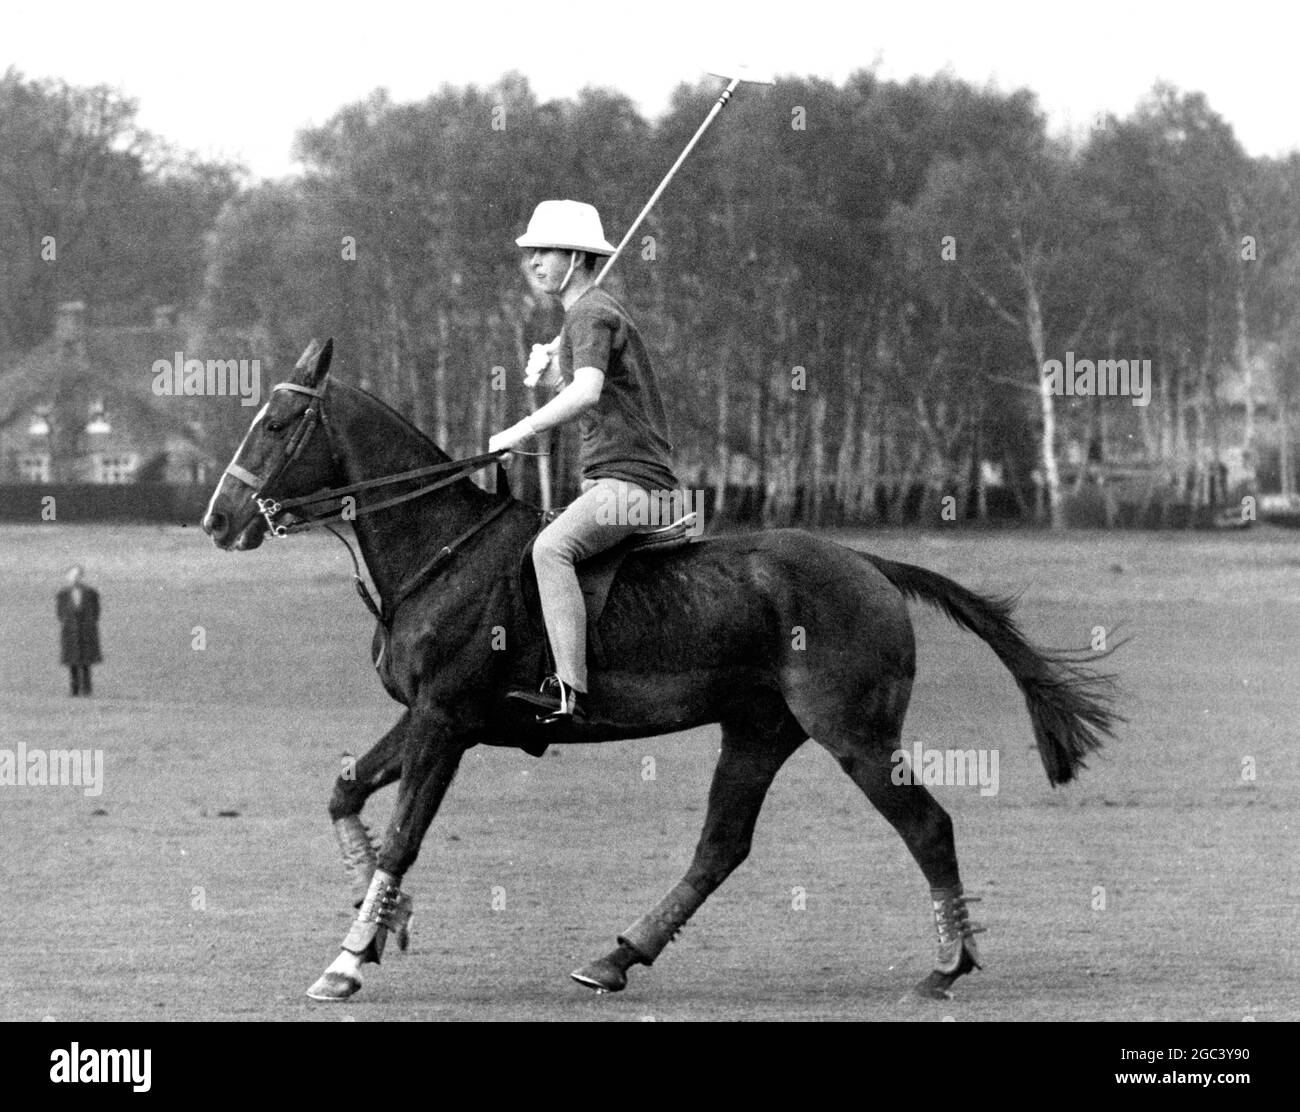 Polo at Smith's Lawn , Windsor . Prince Charles played a practice polo match , and was later joined in play by Prince Philip , who had previously played for Priar Park against the Household Brigade . Prince Charles with Polo stick over his shoulder rides out to play . 24 April 1965 Stock Photo